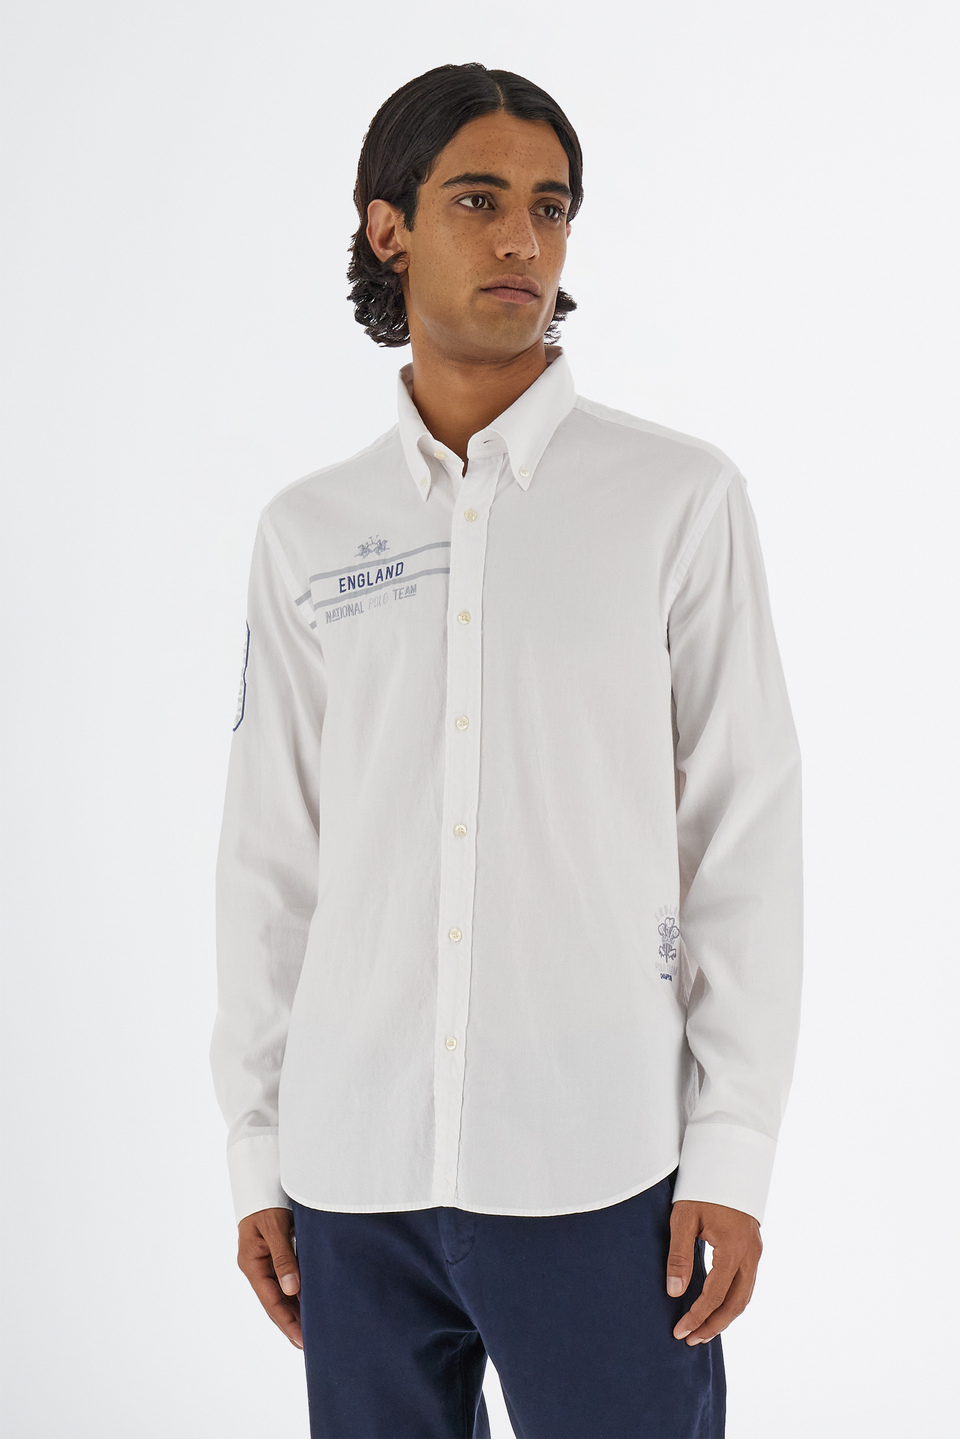 Men’s Inmortales shirt with long sleeves regular fit oxford fabric | La Martina - Official Online Shop